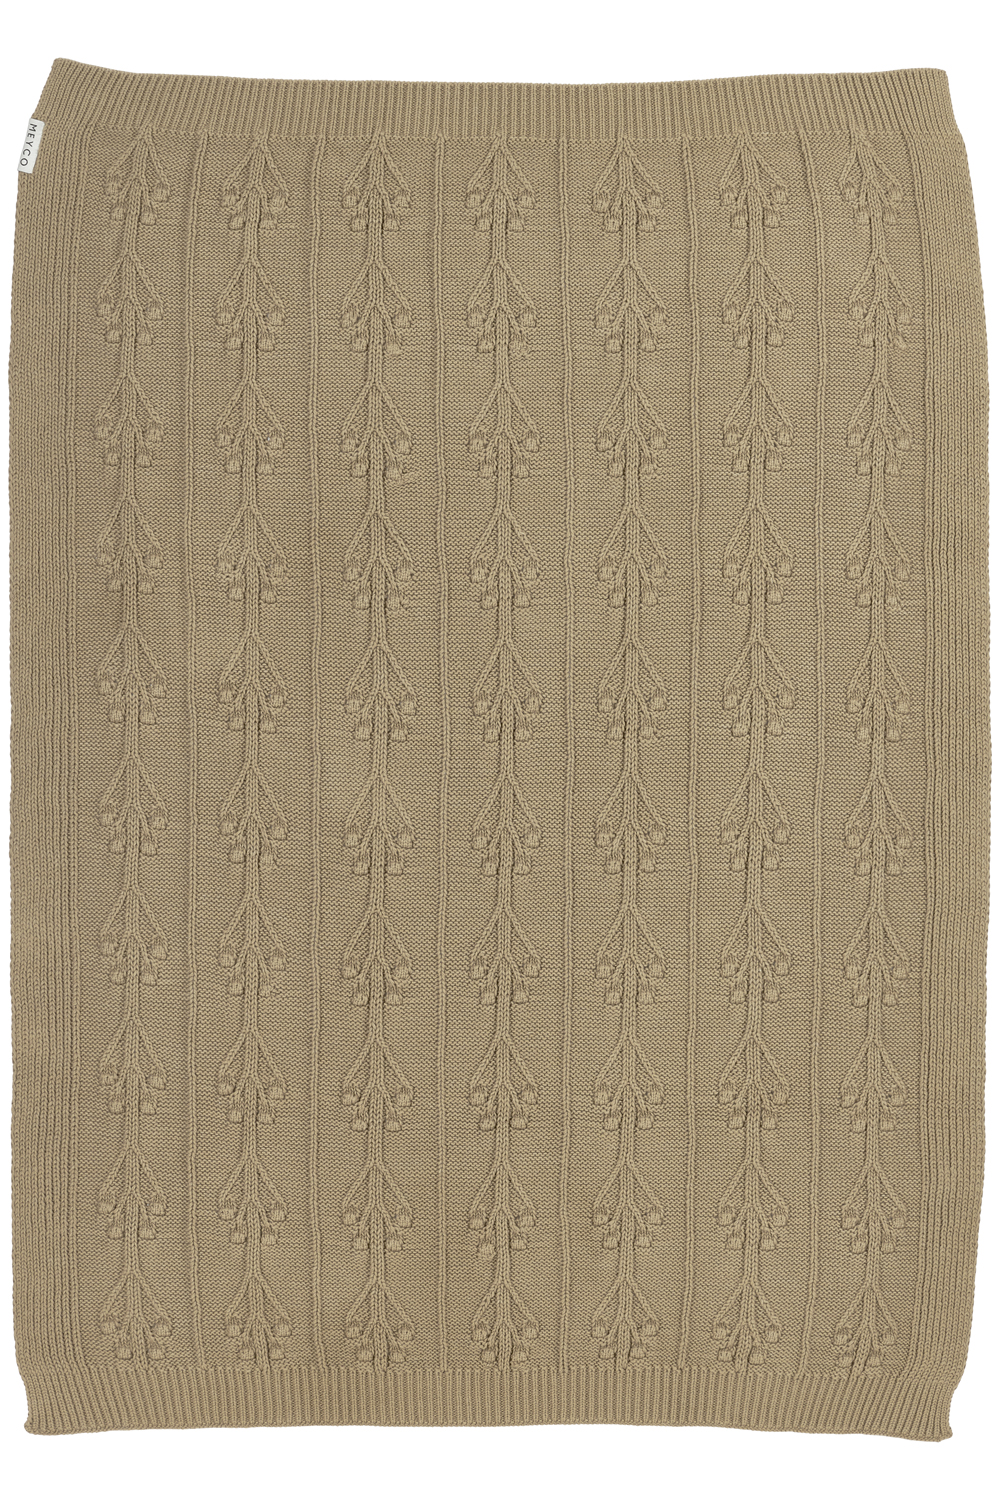 Cot bed blanket Romantic Flower - taupe - 100x150cm